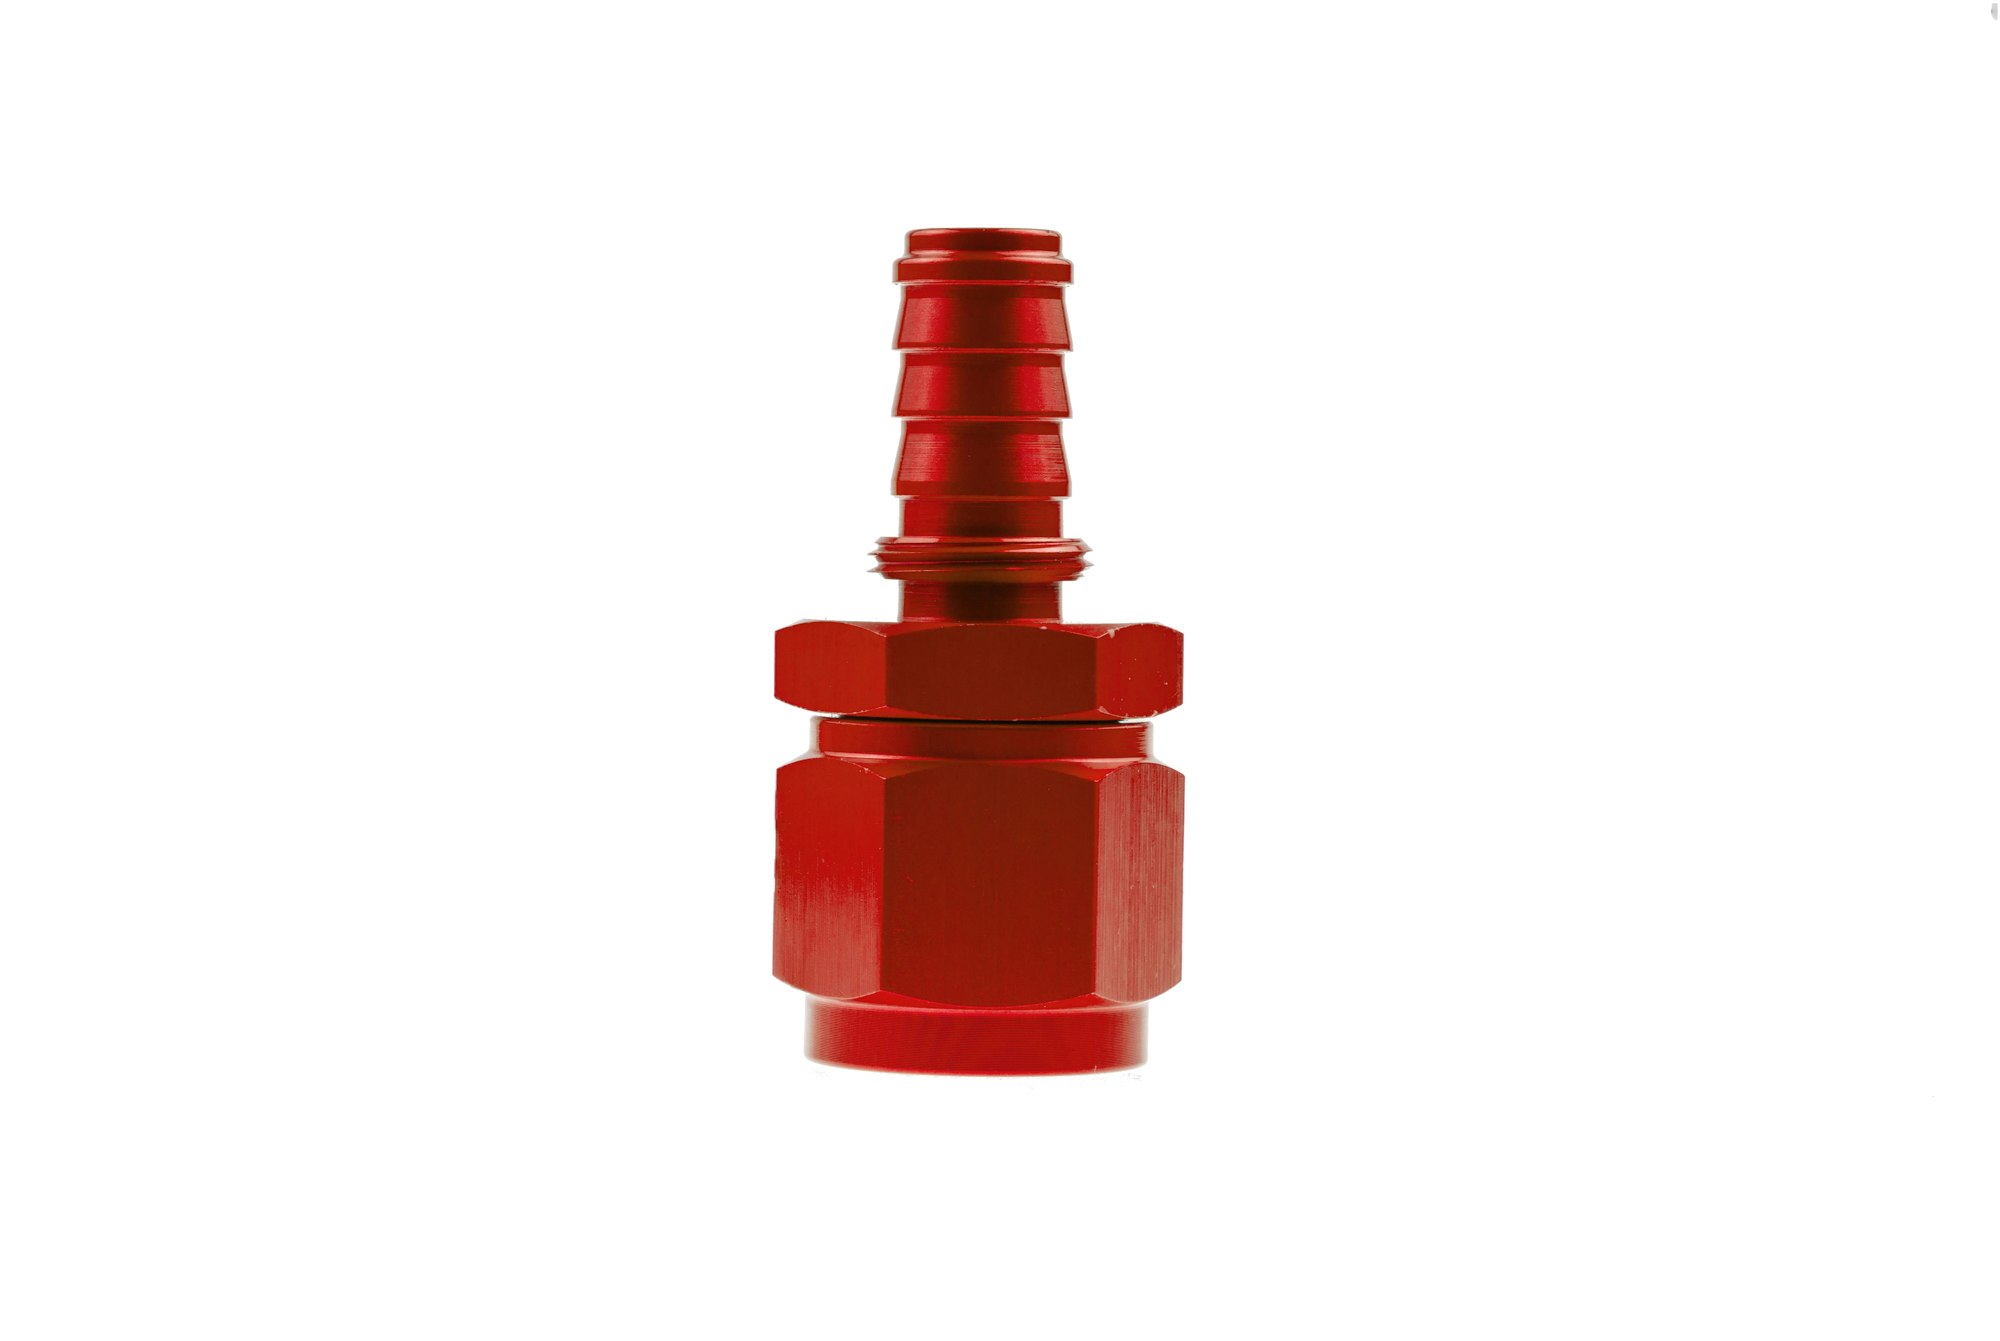 Russell 610170 Red/Blue Anodized Aluminum 8AN 90-Degree Hose End 